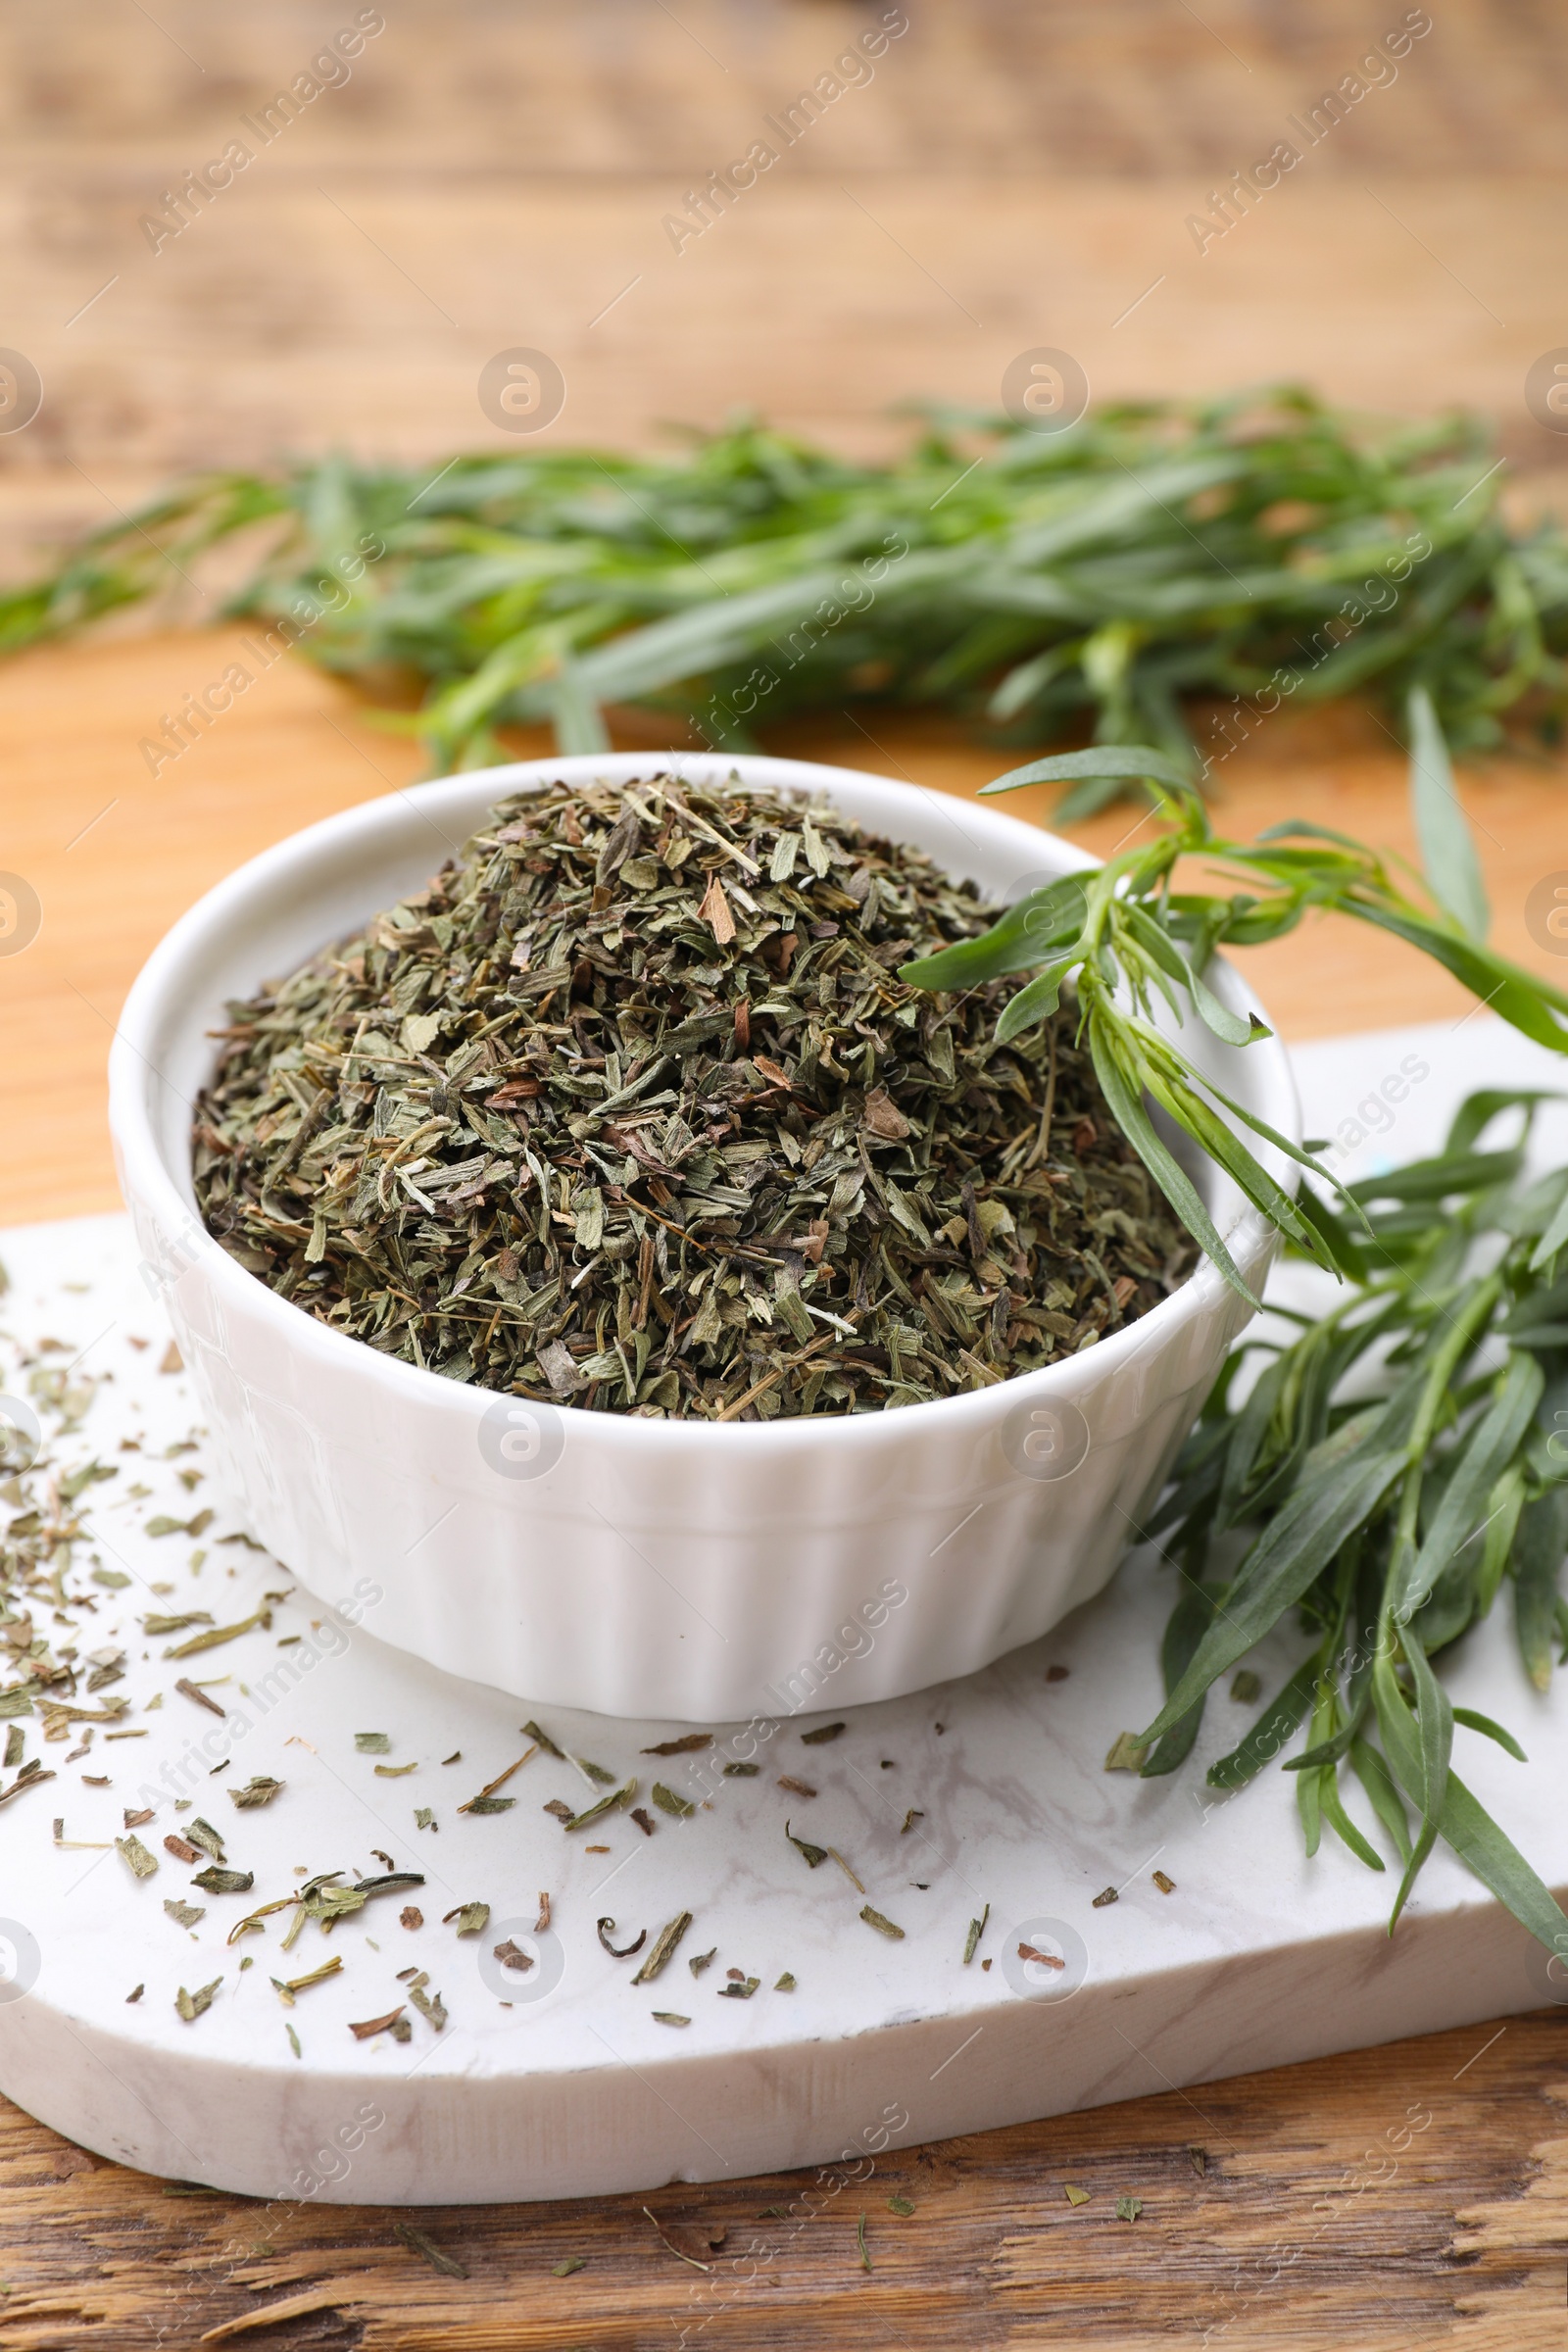 Photo of Dry and fresh tarragon on wooden table